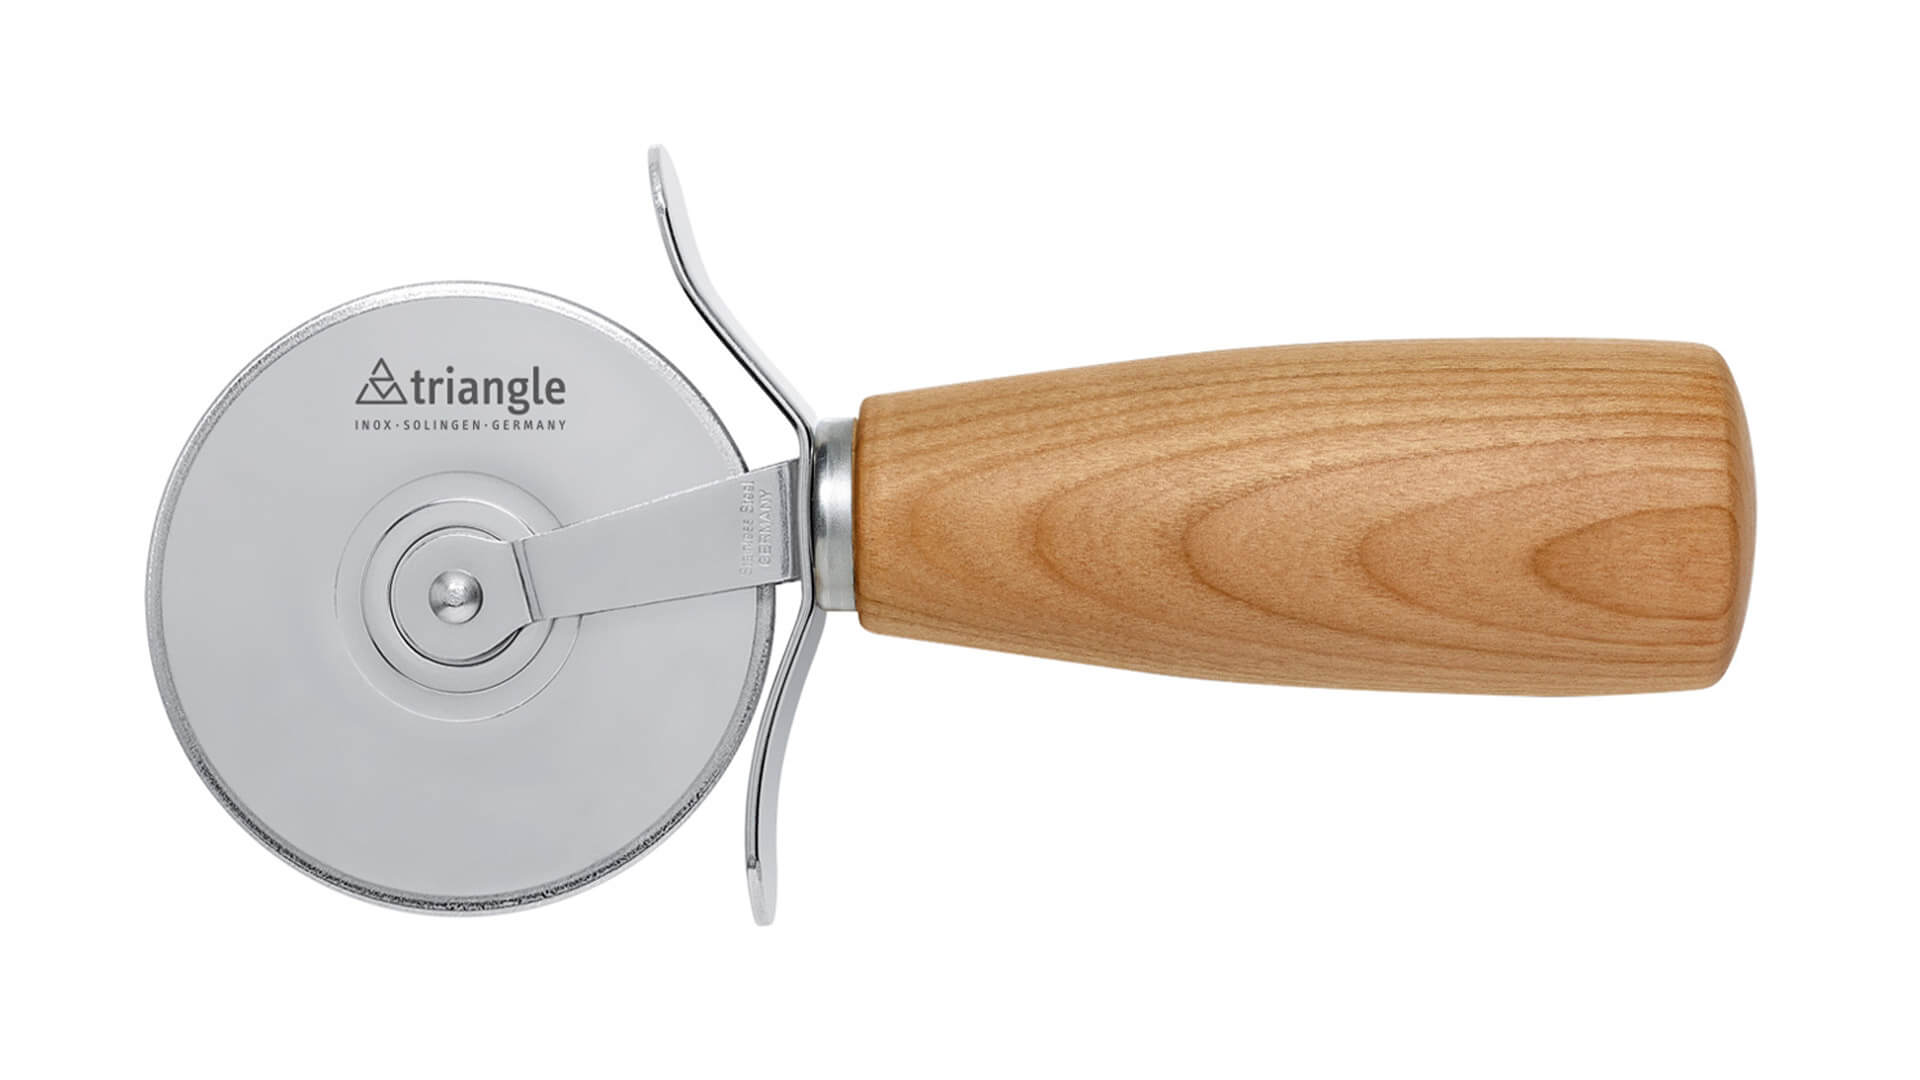 triangle-pizza-cutter-handle-made-of-cherry-wood-germany-solingen